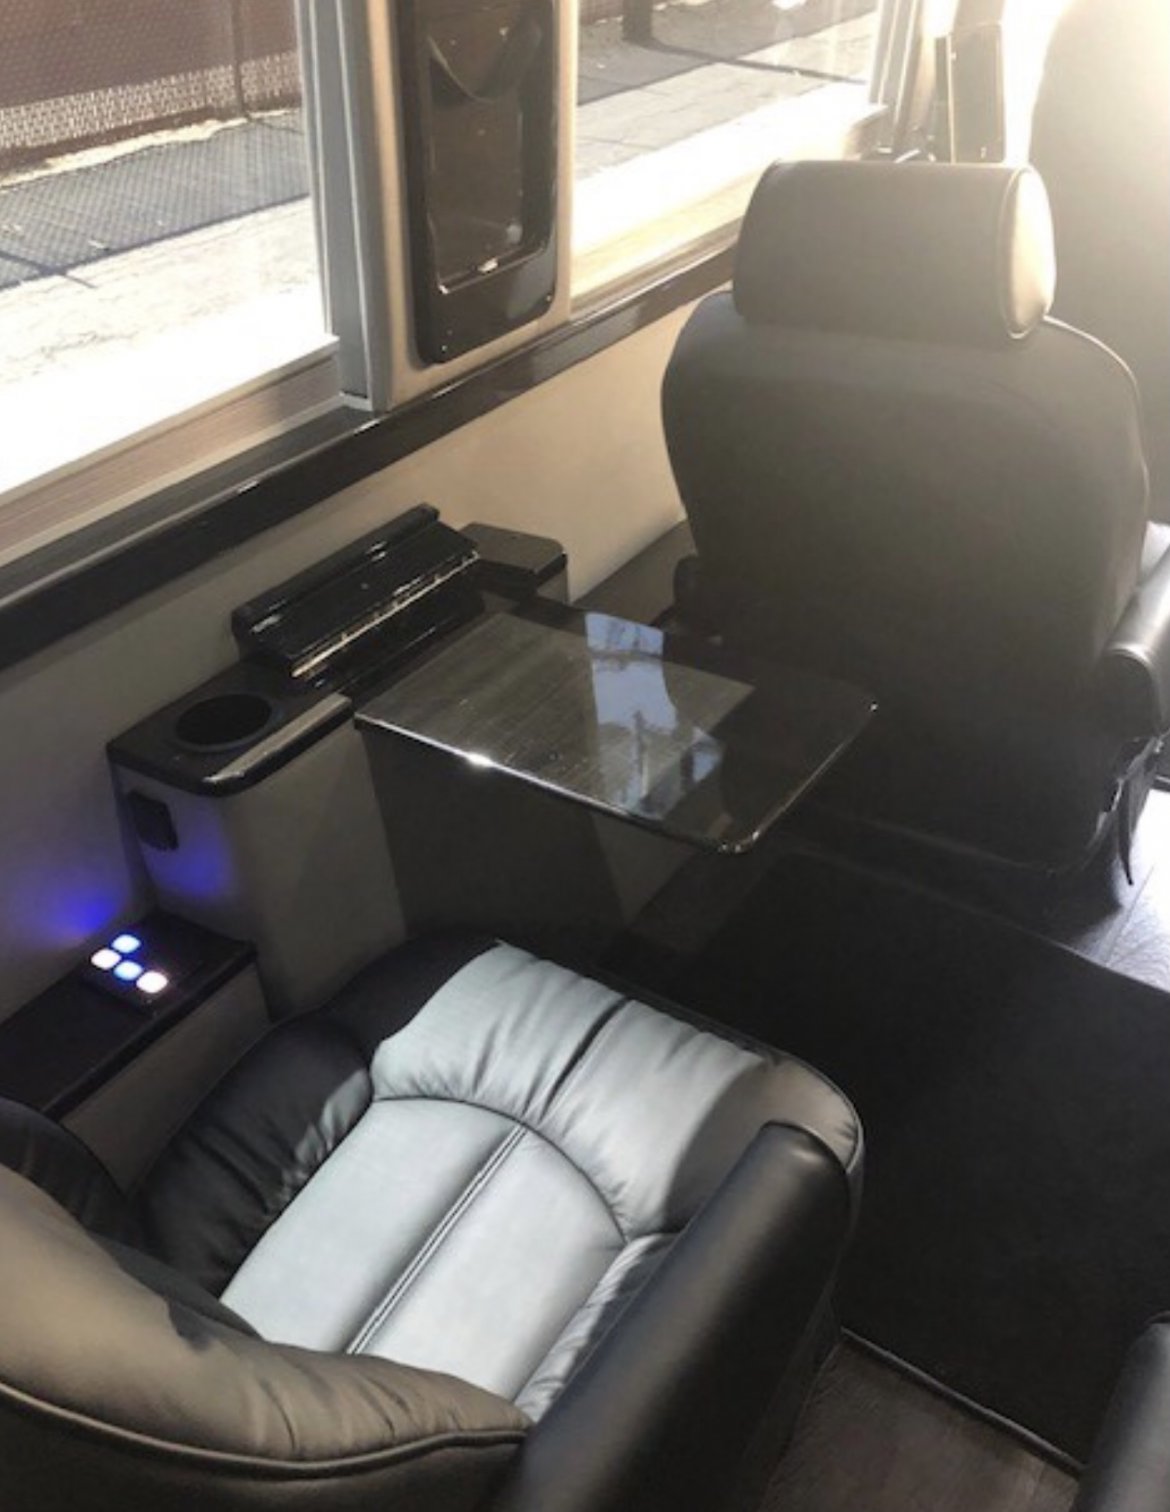 Sprinter for sale: 2016 Mercedes-Benz Model 2500 extended wheelbase 170 CEO built by Midwest 170&quot; by CEO Midwest custom built